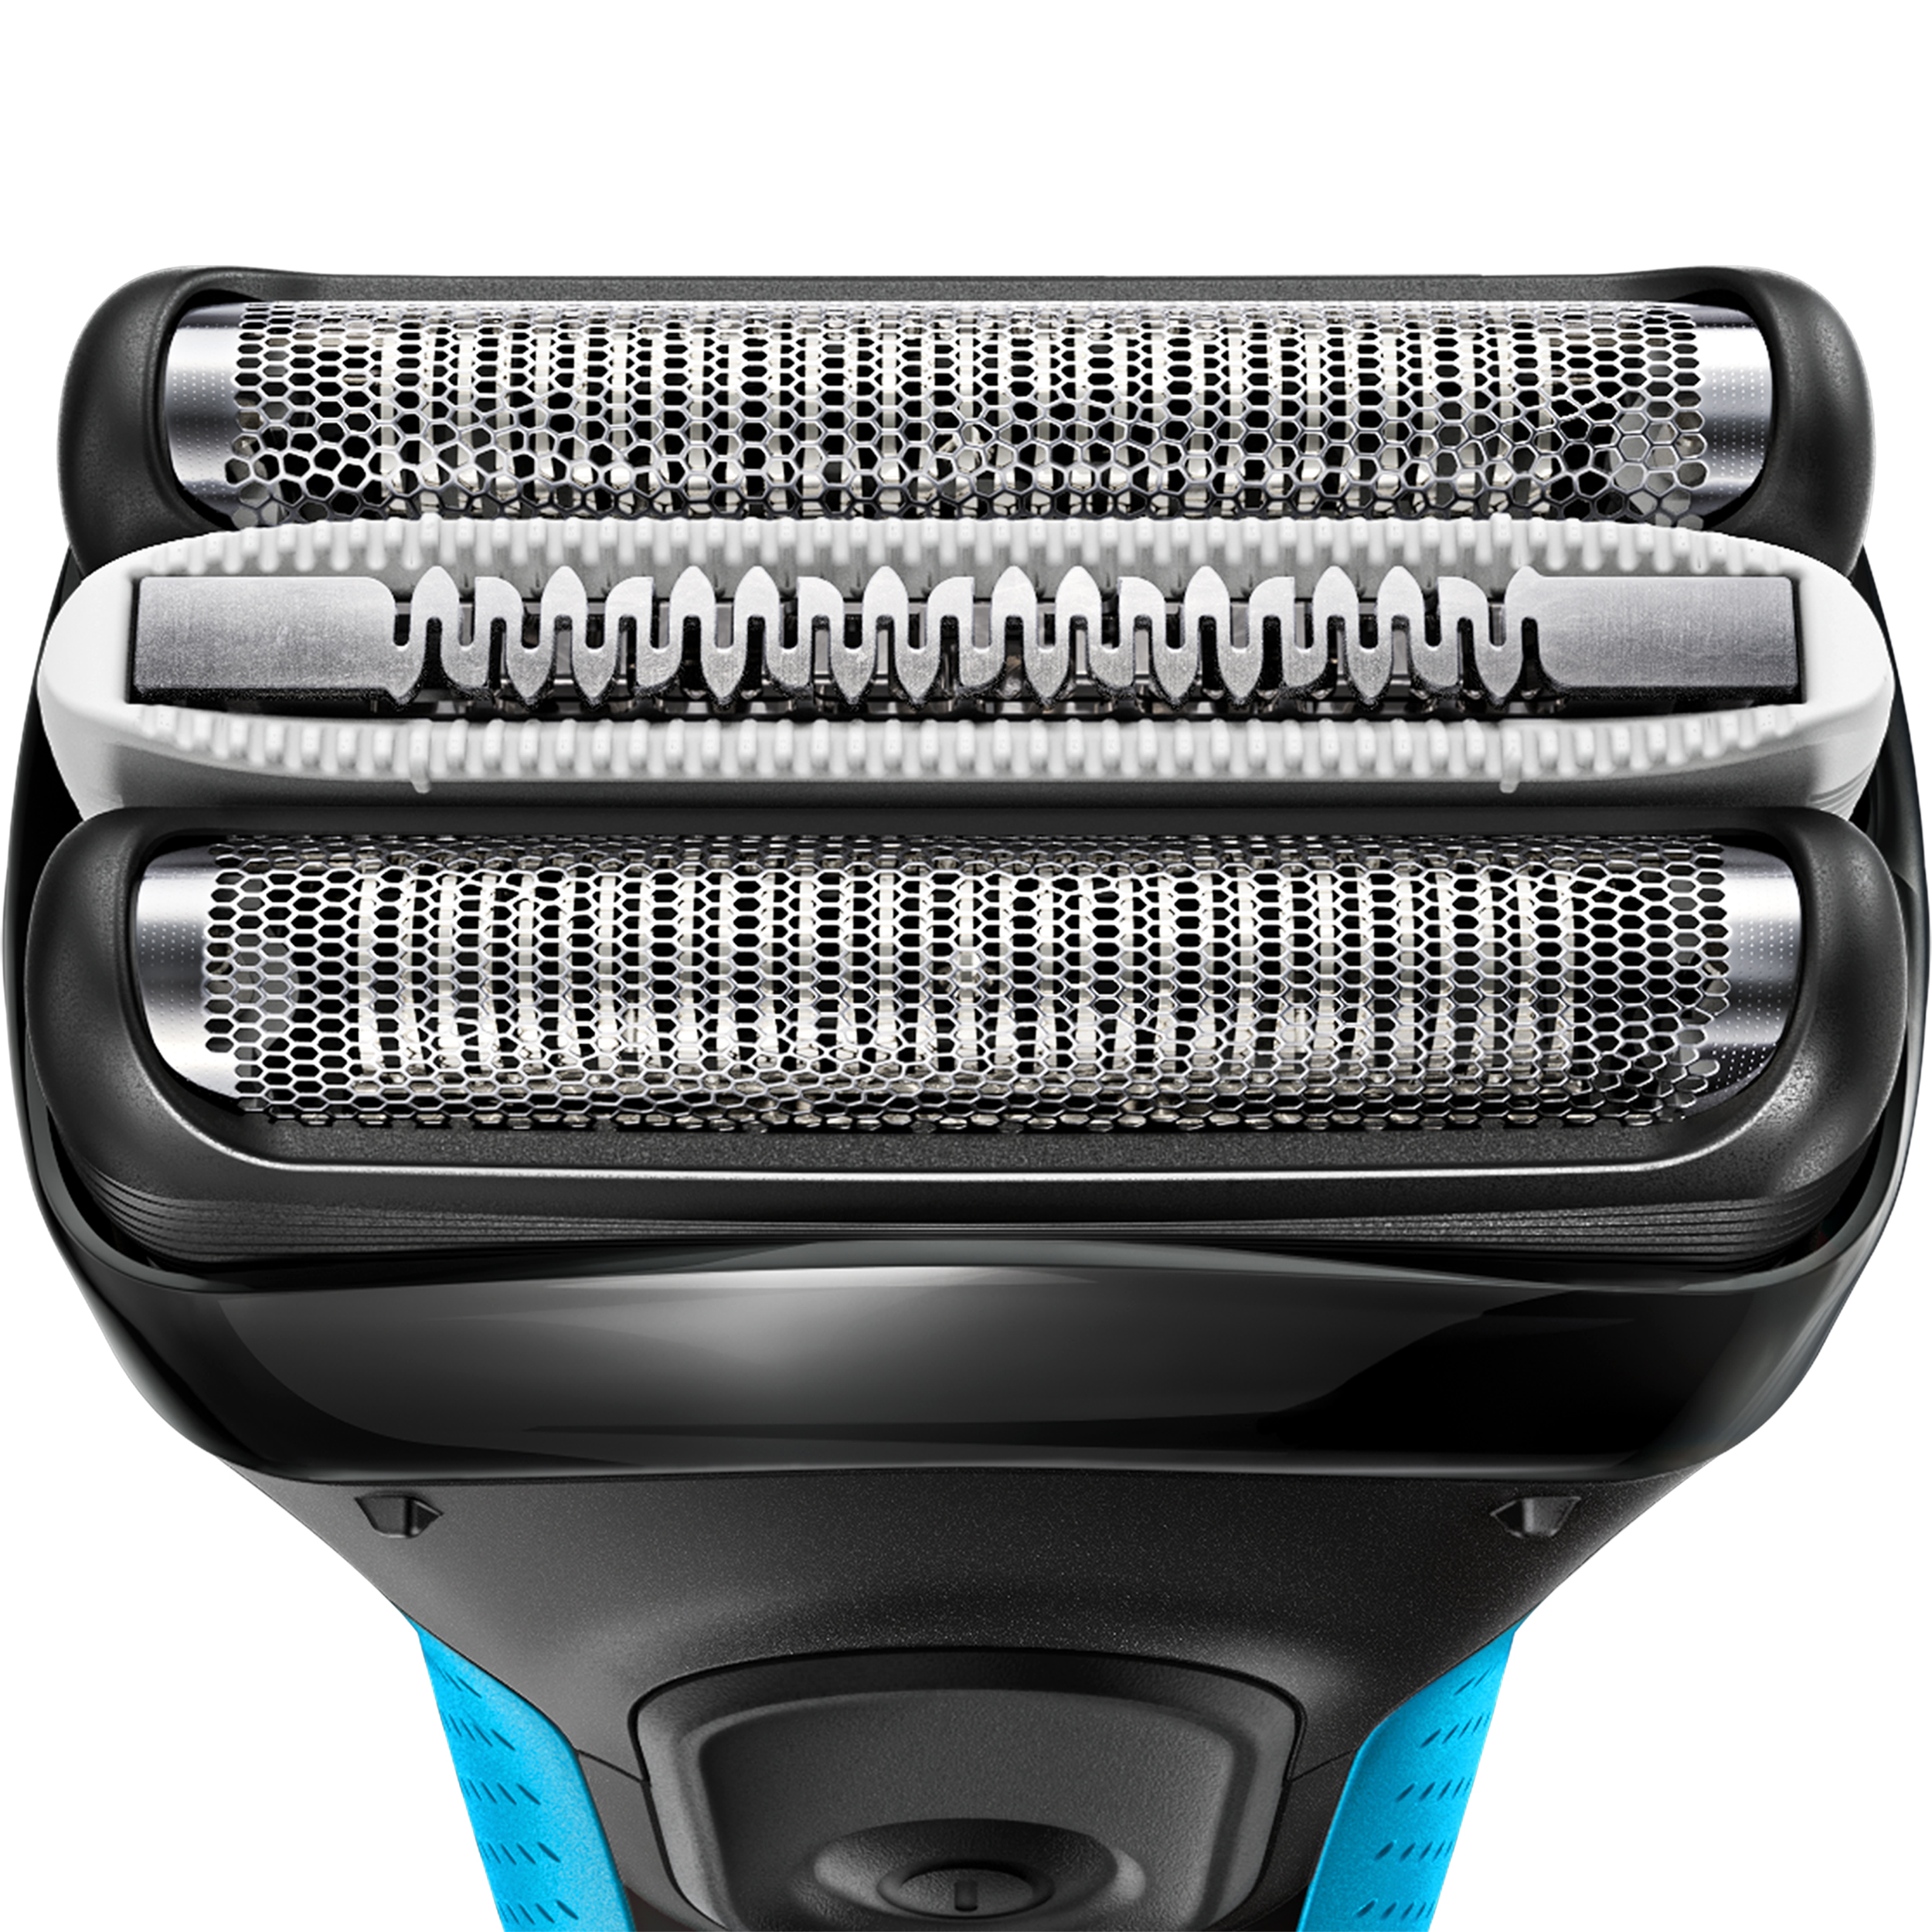 Braun Series 3 ProSkin 3040s Wet Dry Electric Shaver, Charging Stand - image 4 of 6